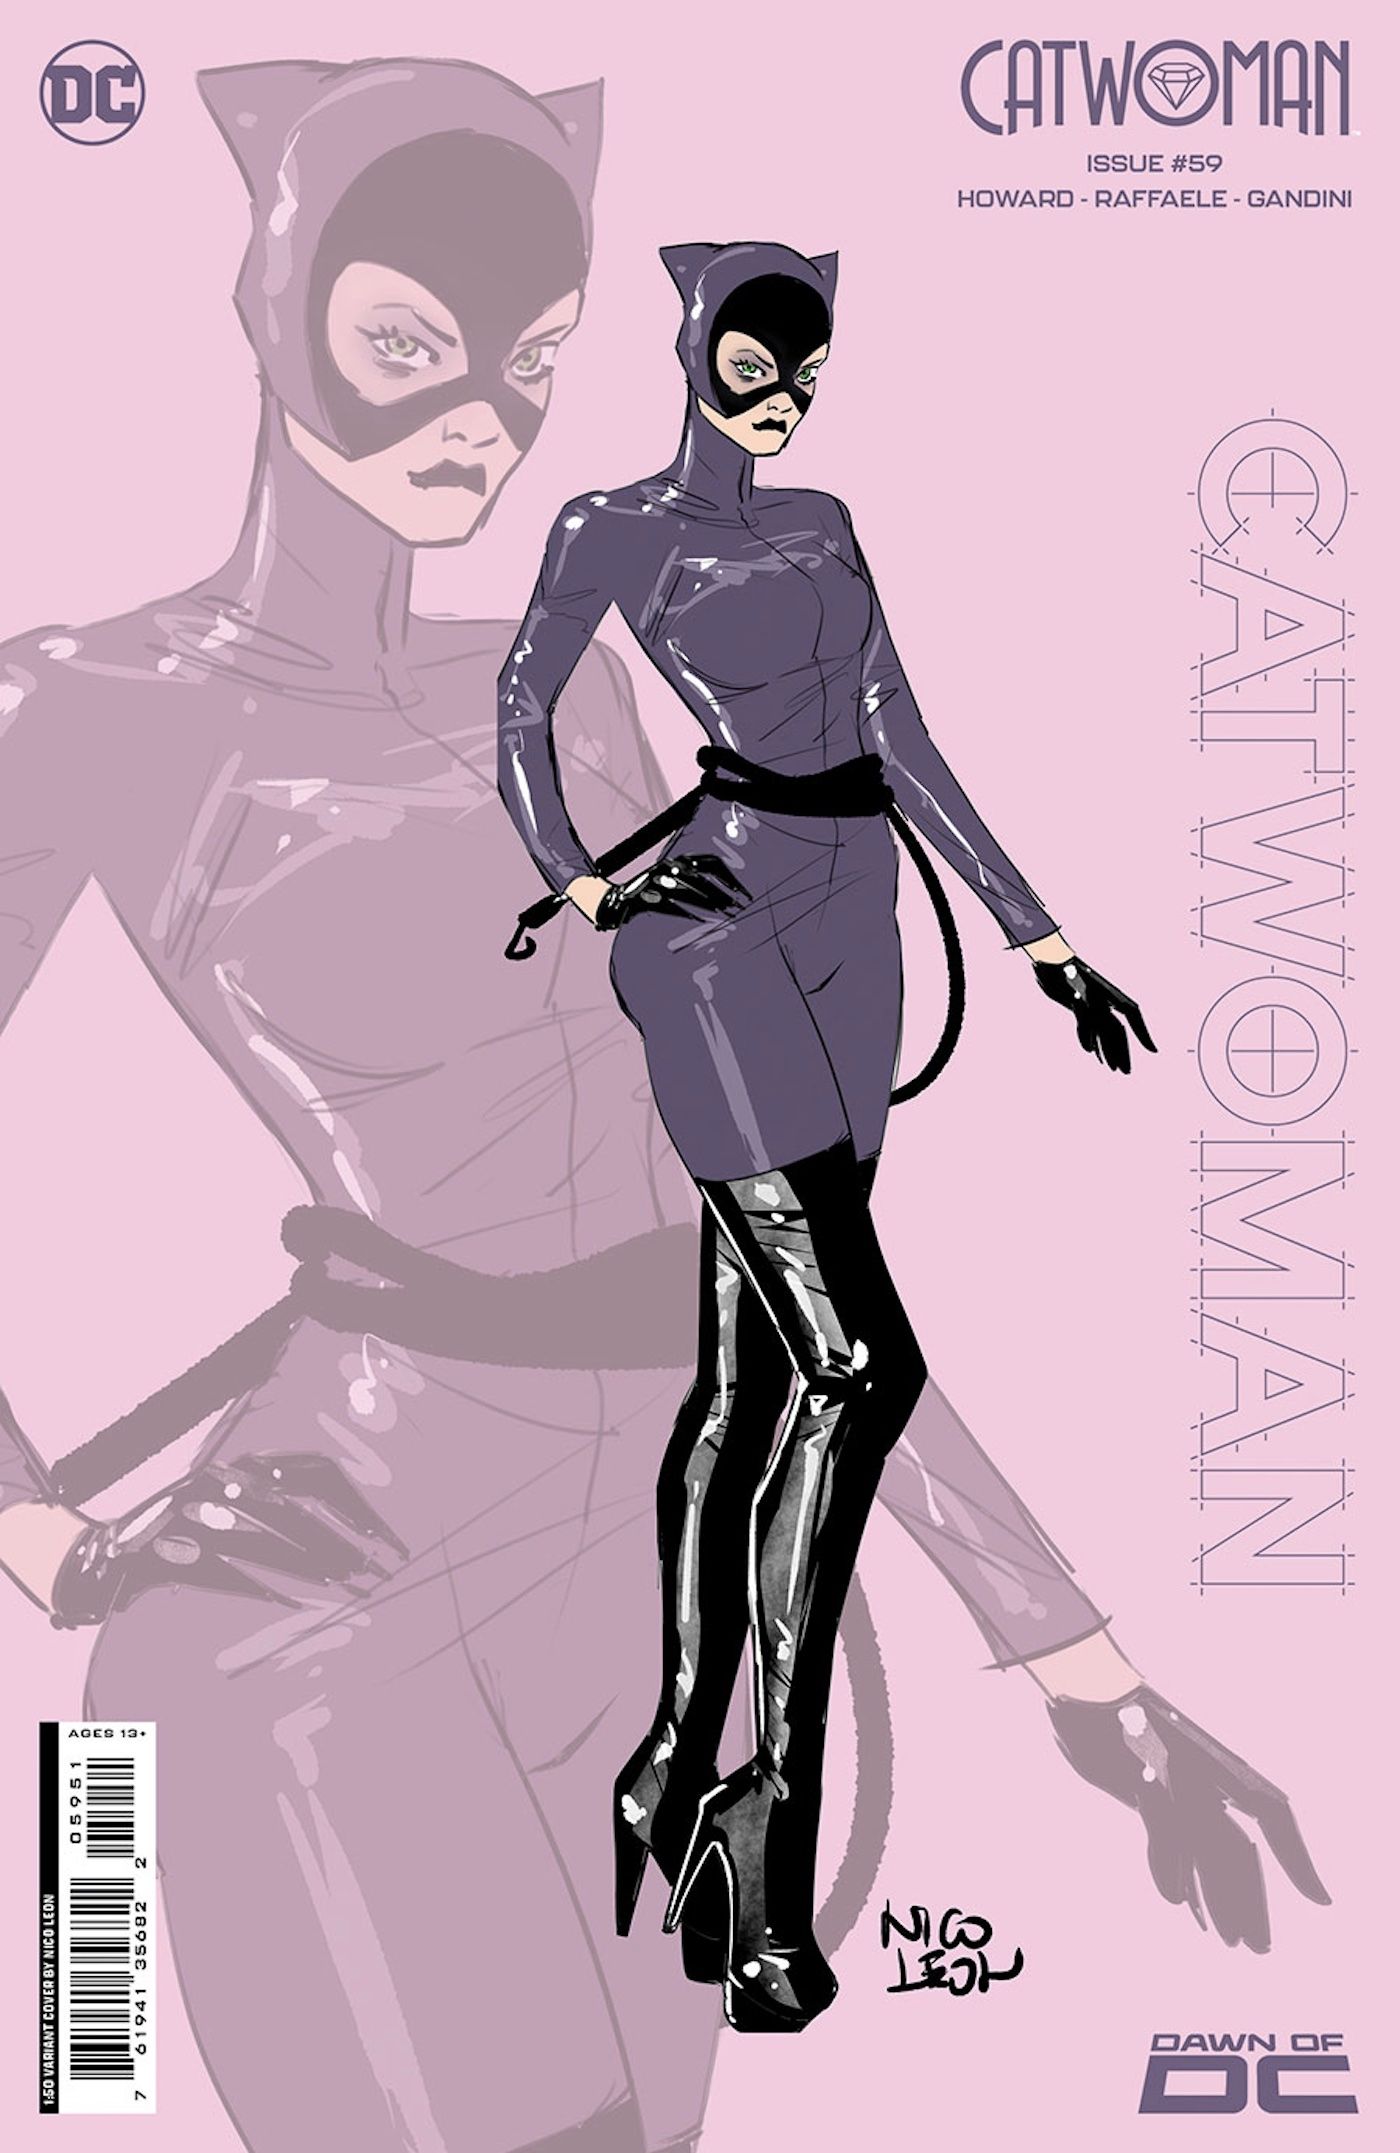 Catwoman 59 variant